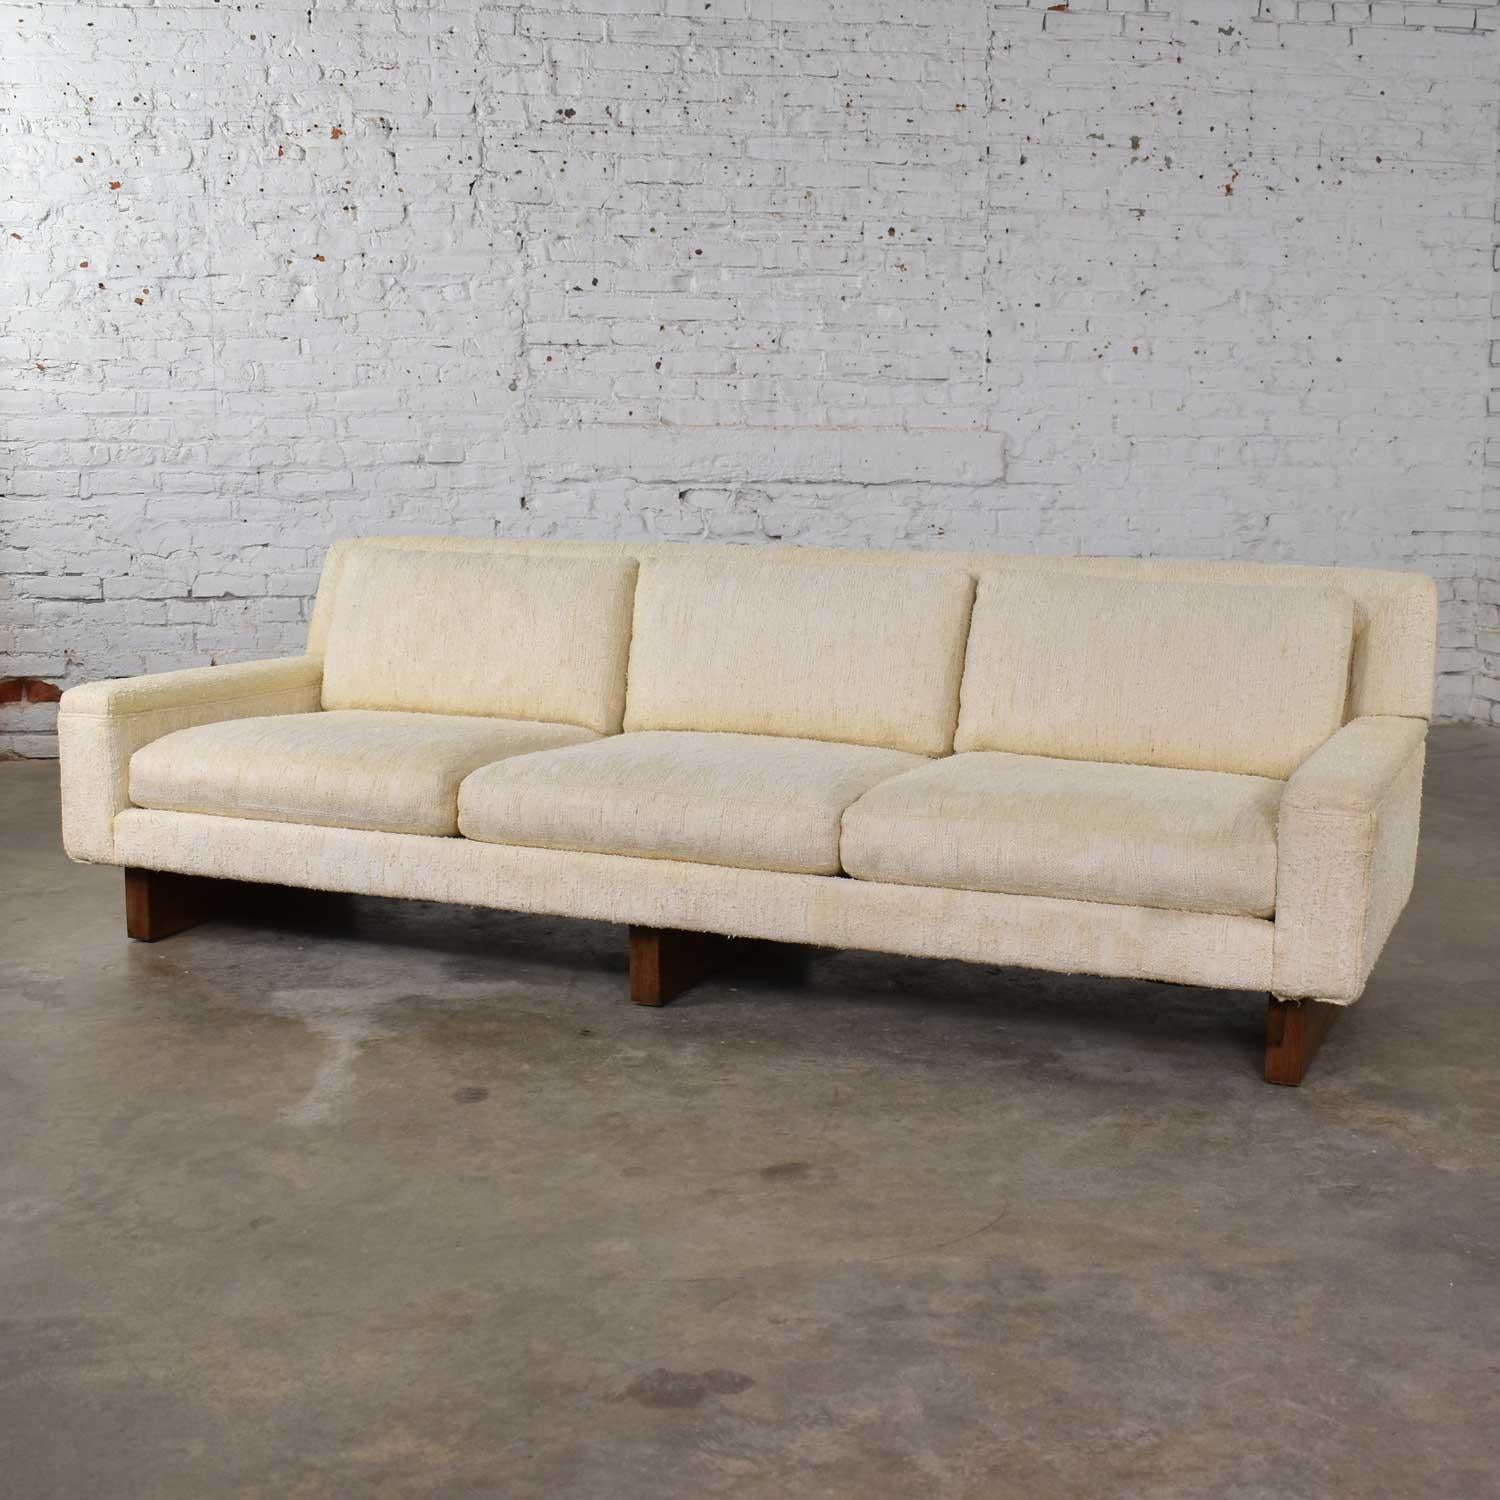 Fabric Mid-Century Modern Lawson Style White Sofa by Flair Division for Bernhardt